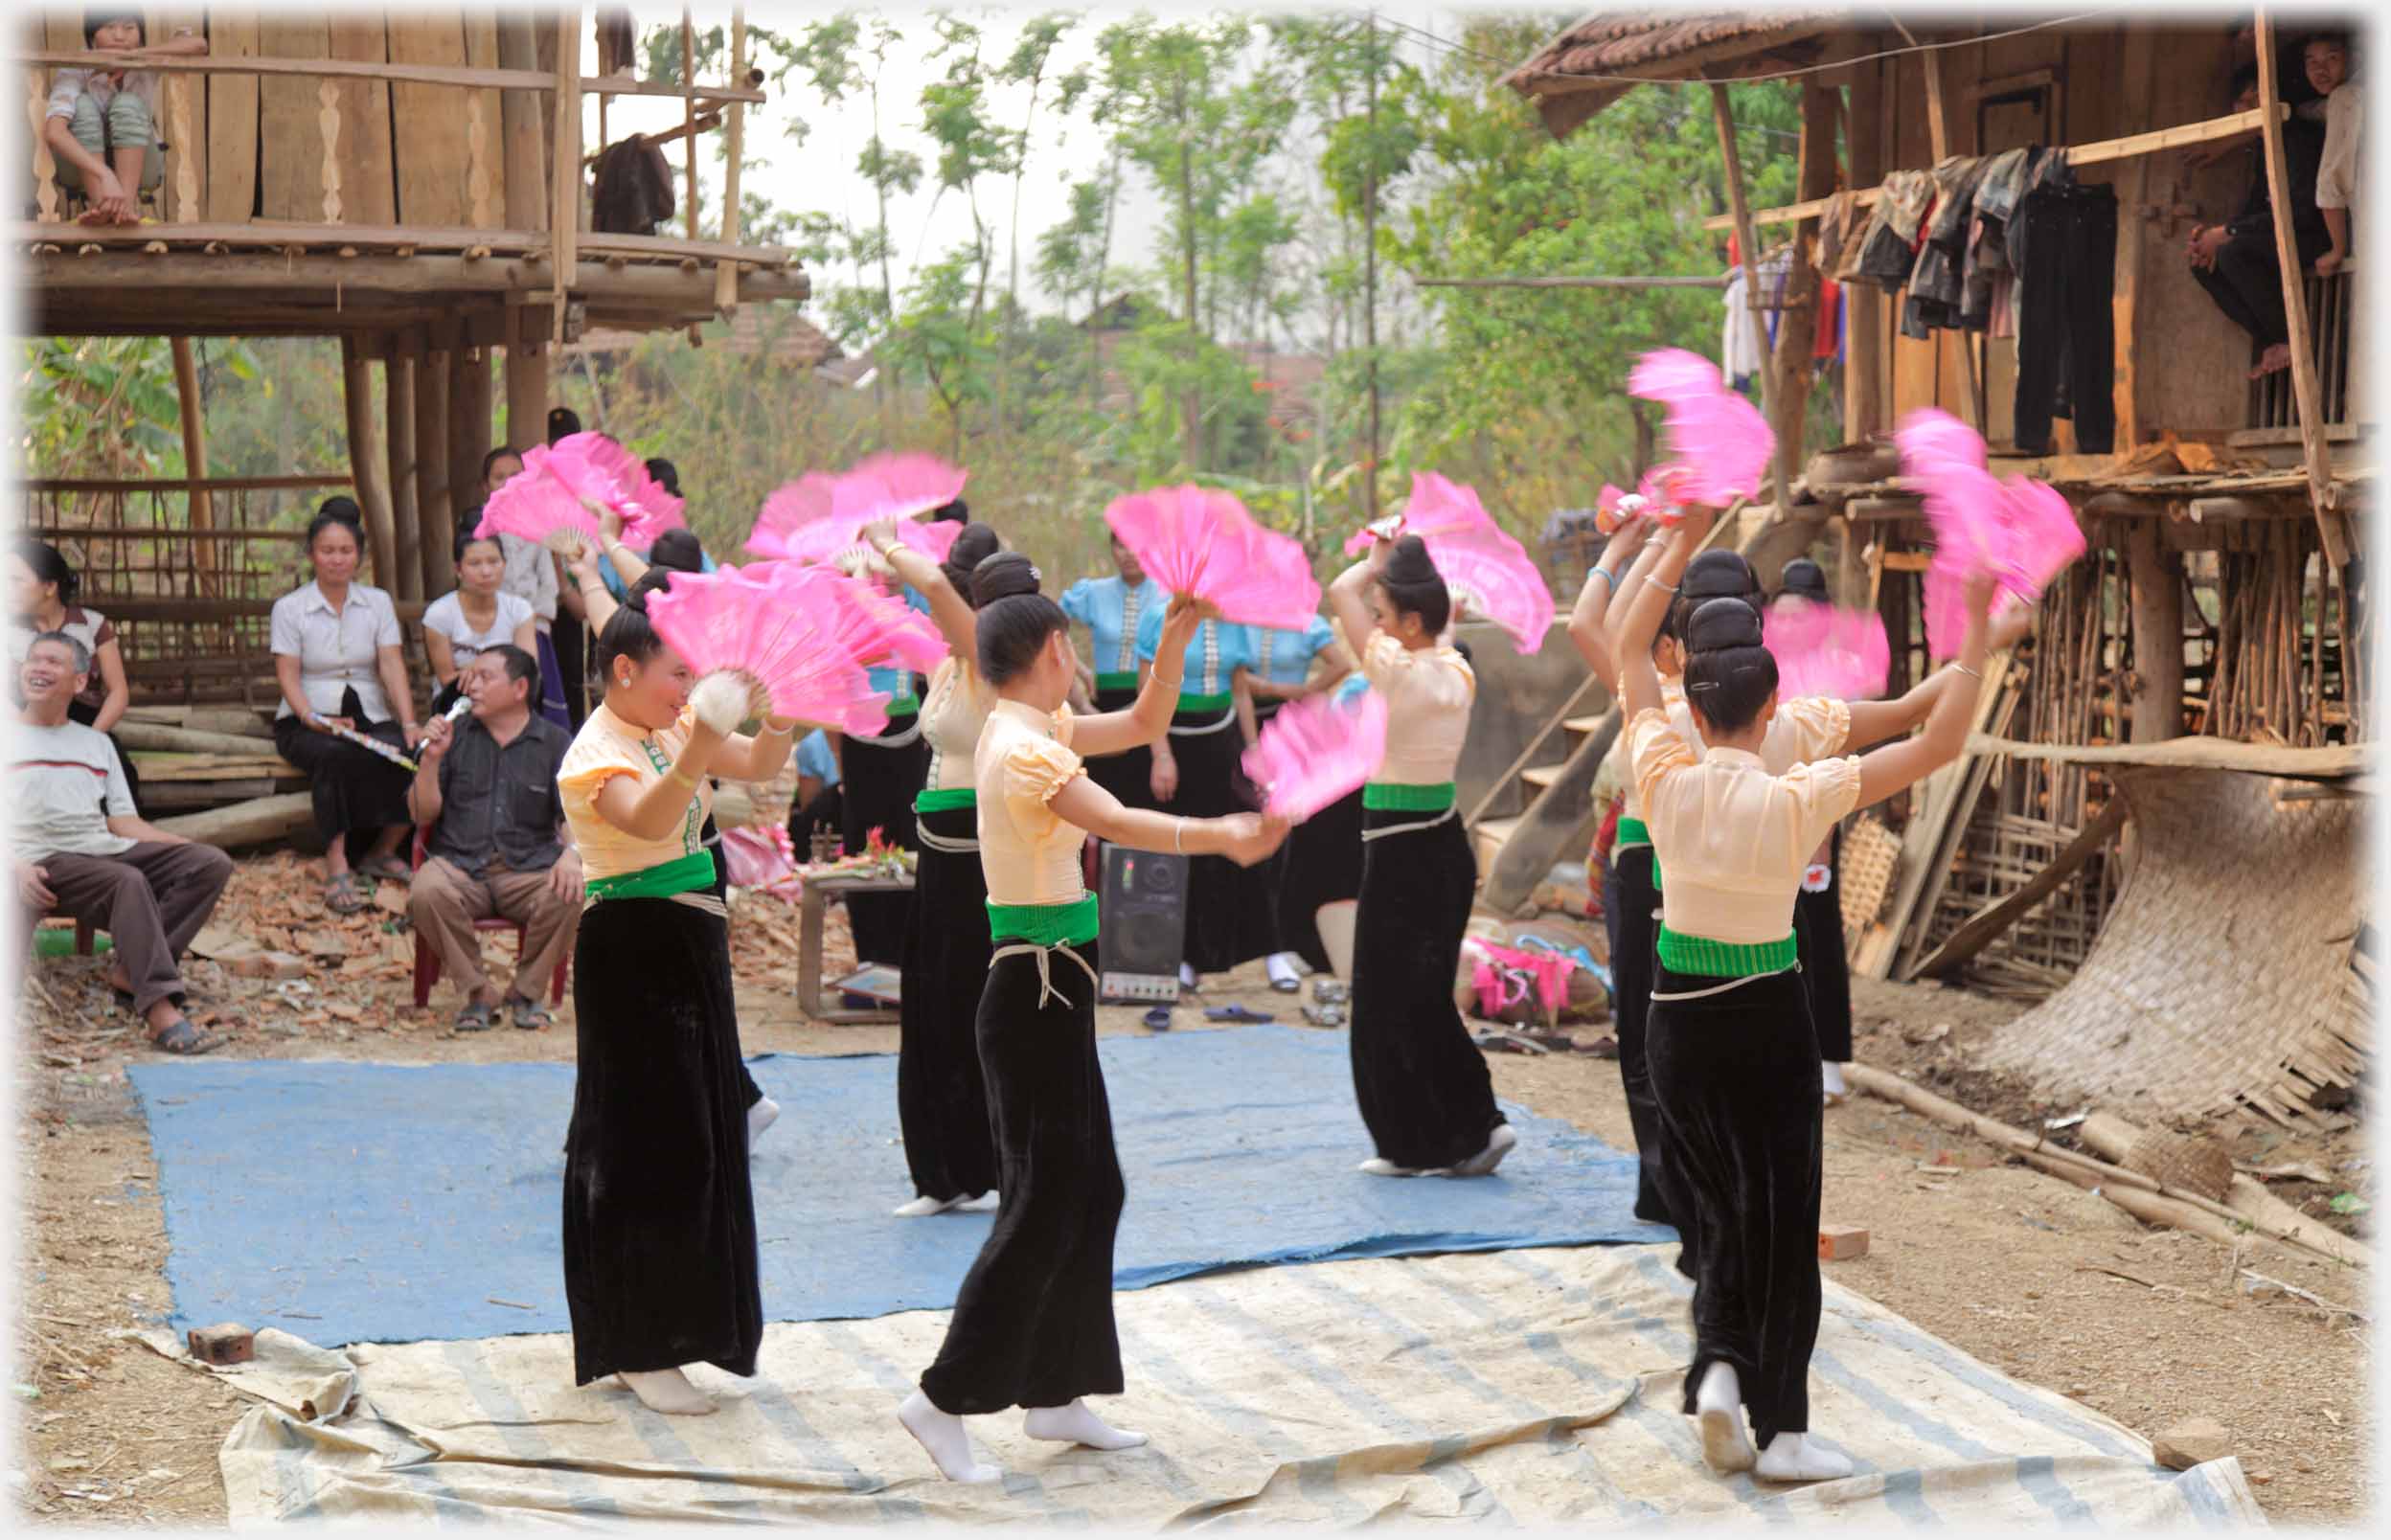 Circle of women dancing in long black skirts holding up fans.